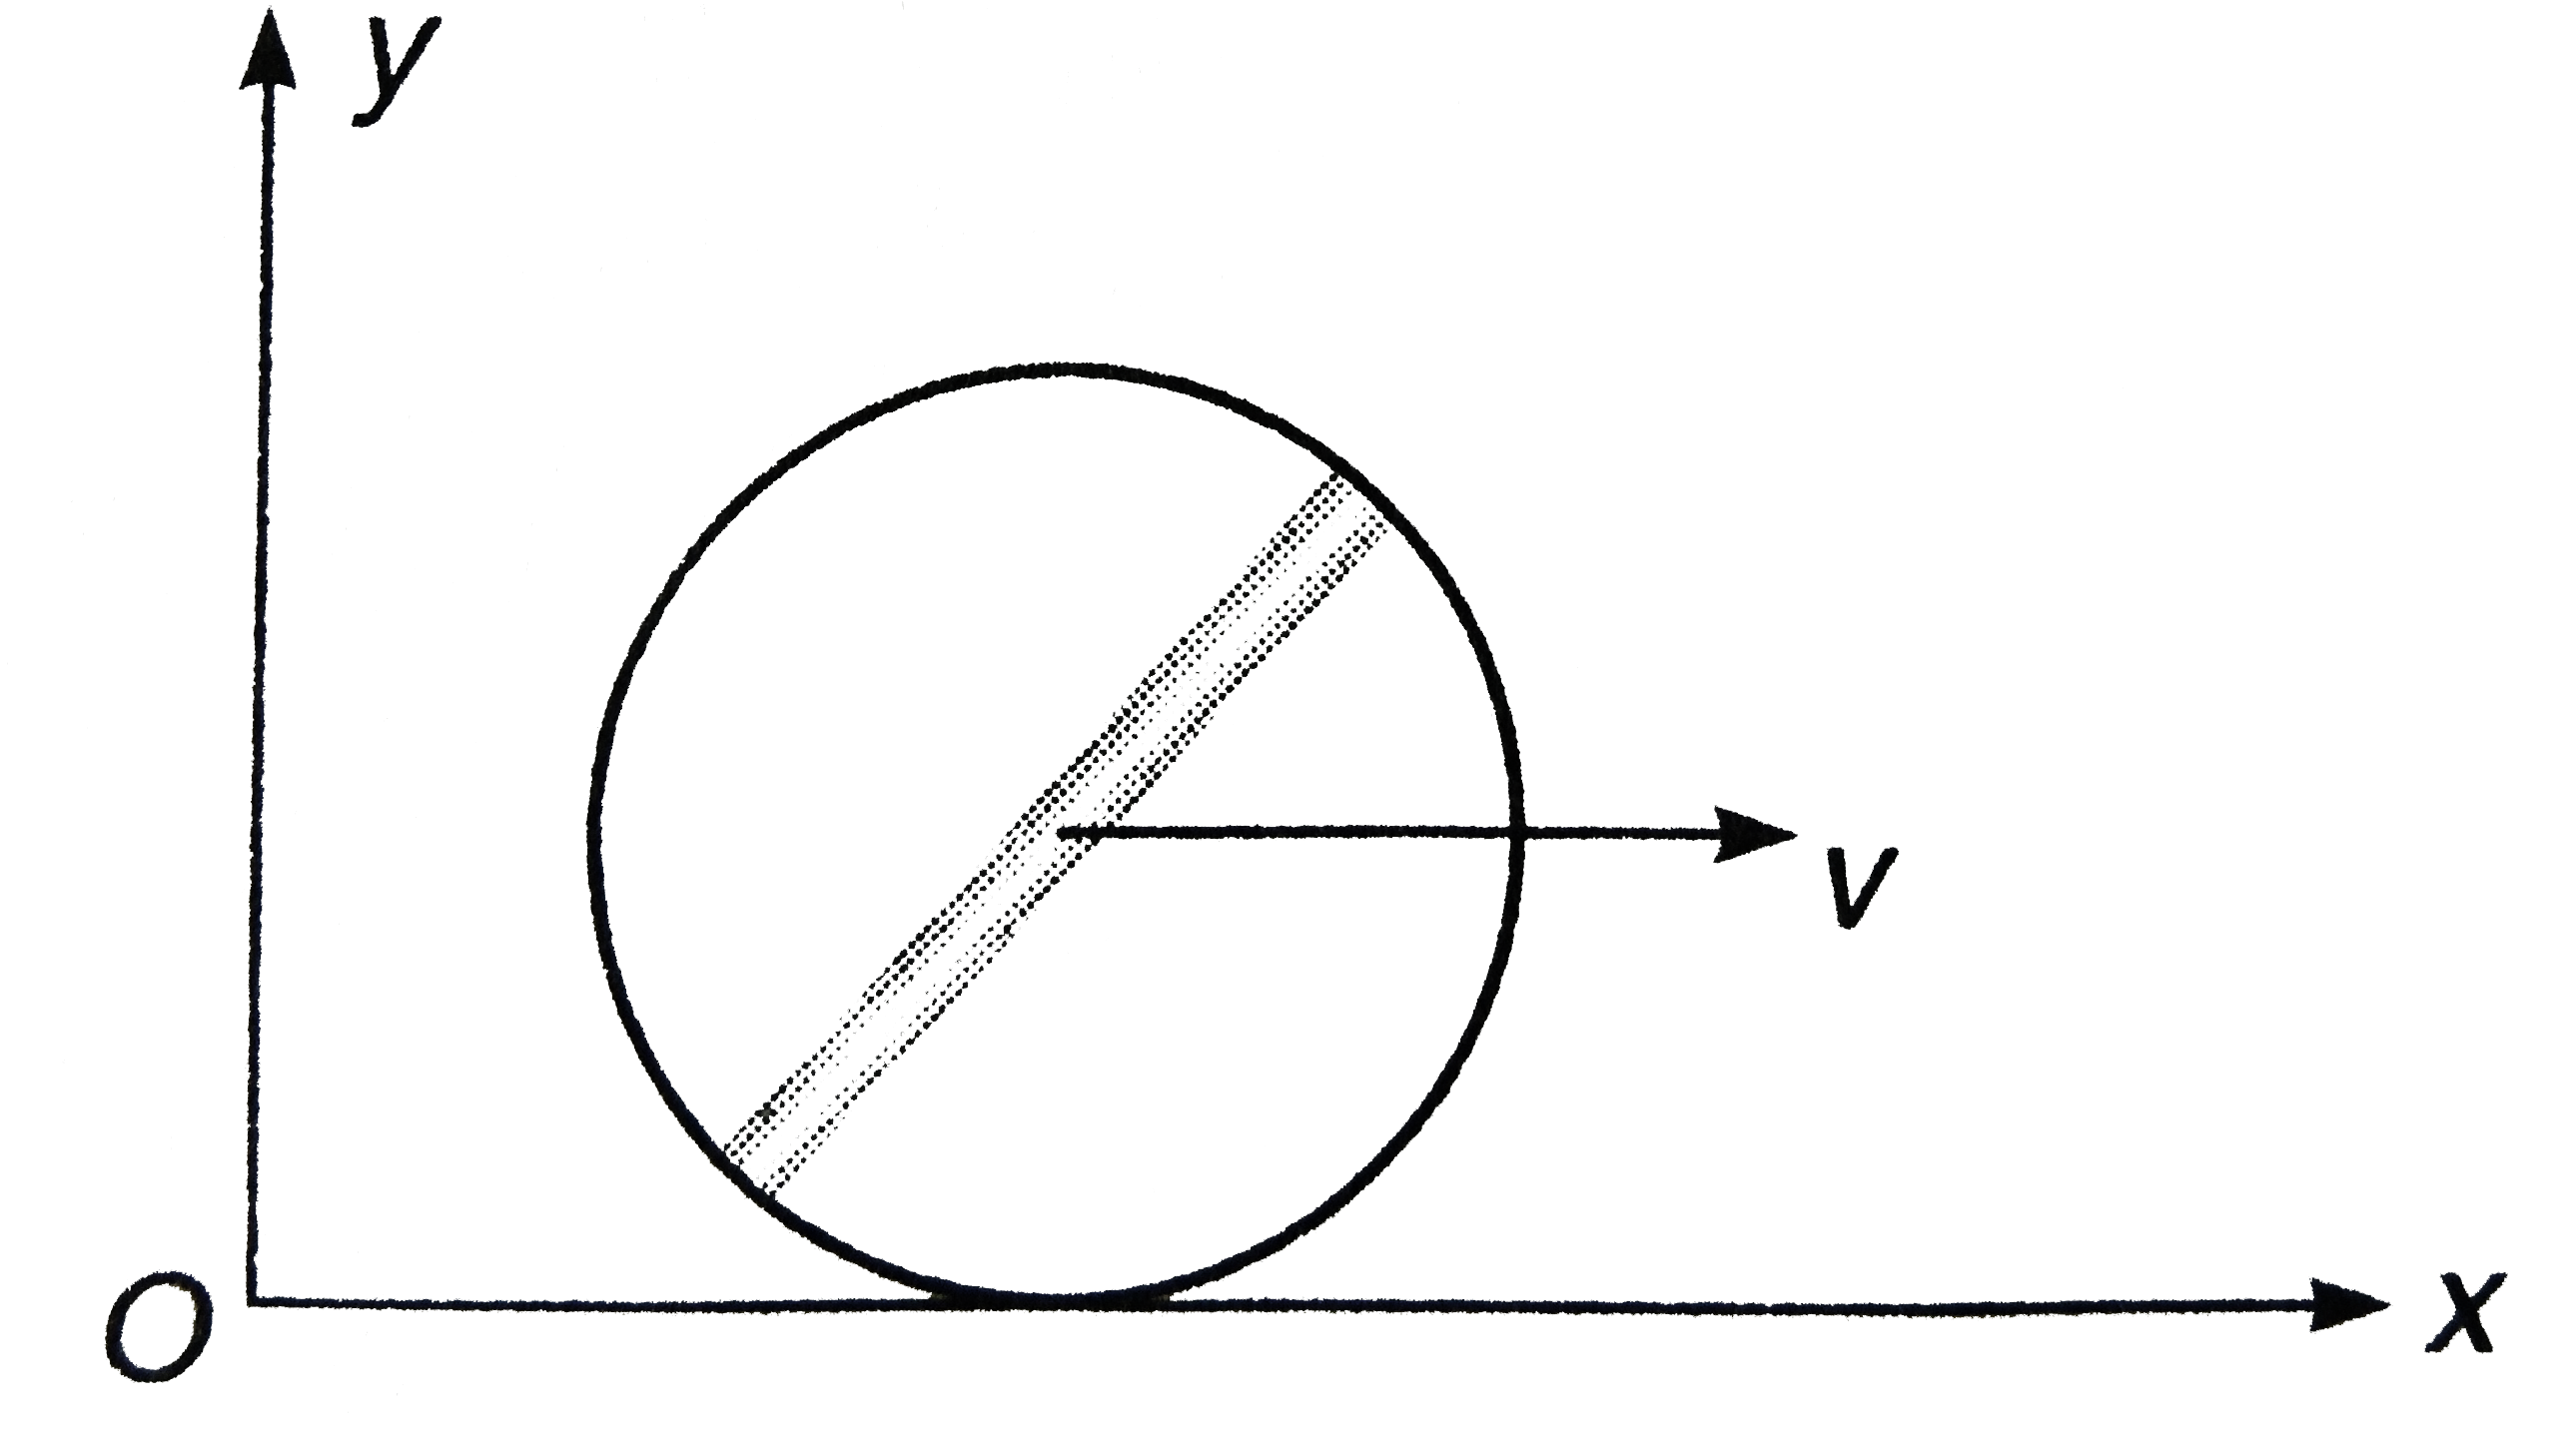 A rod of mass m and length 2 R is fixed along te diameter of a ring of same mass m and radius R as shown in figure. The combined body is rolling without slipping along x-axis find the angular momentum about z-axis.